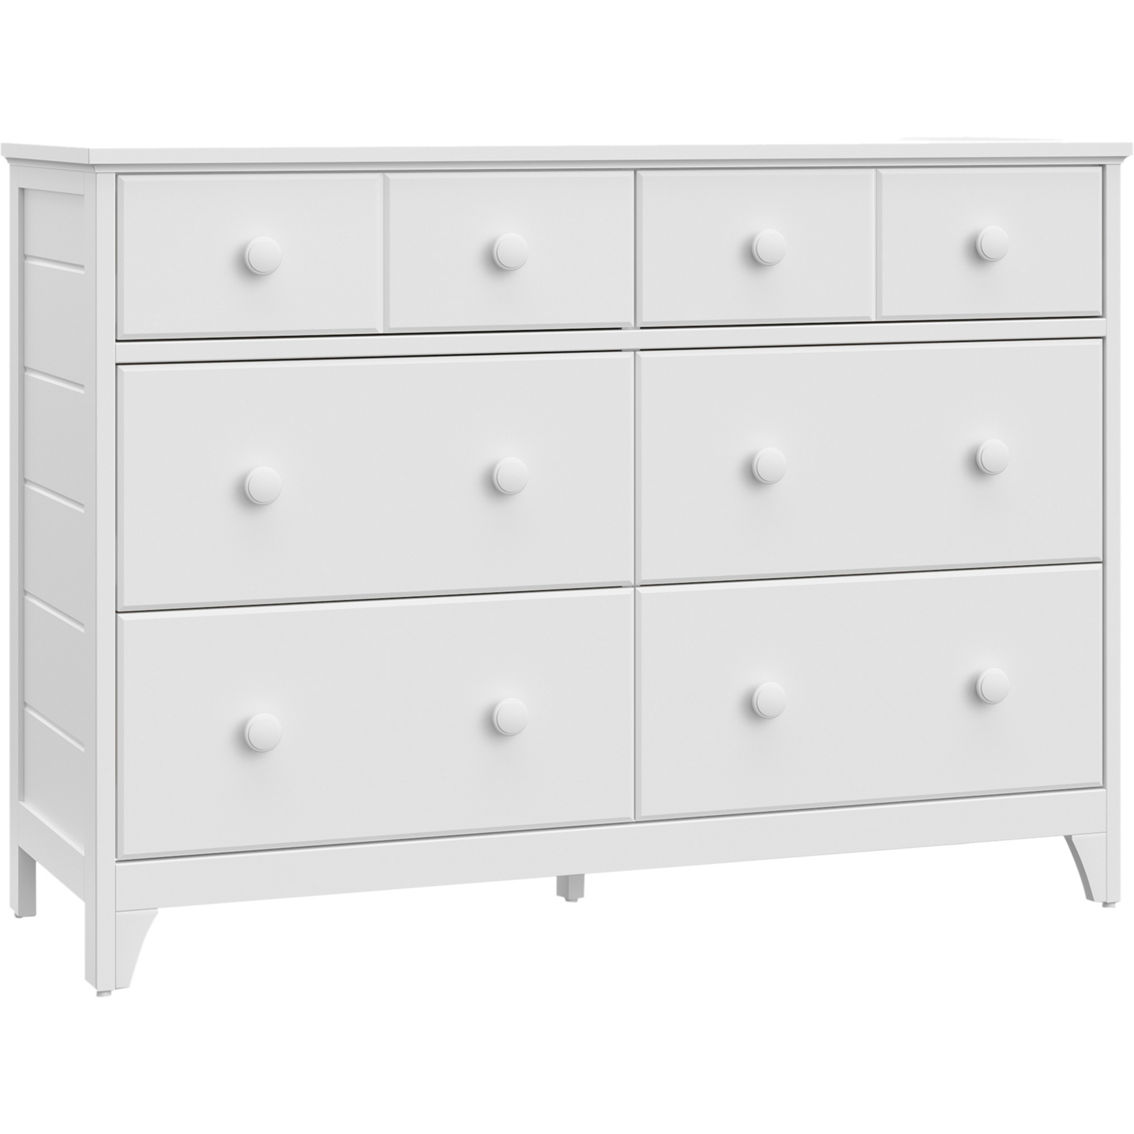 Storkcraft Moss 6 Drawer Double Dresser Dressers Chests Baby